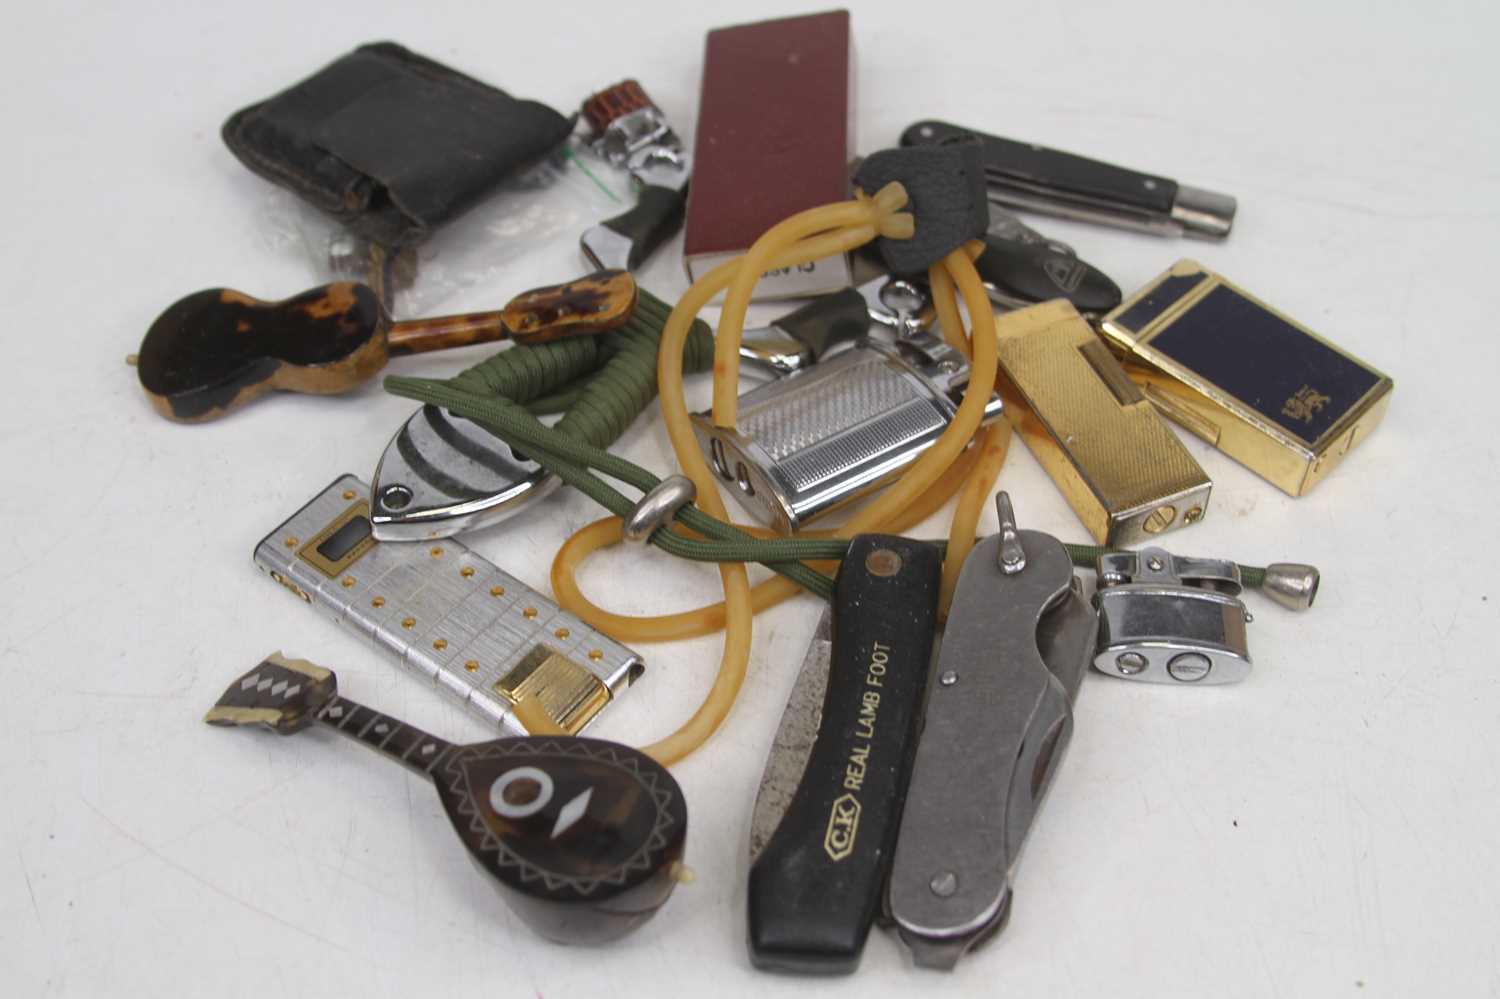 A collection of miscellaneous items to include lighters, pocket knives, and a slingshot